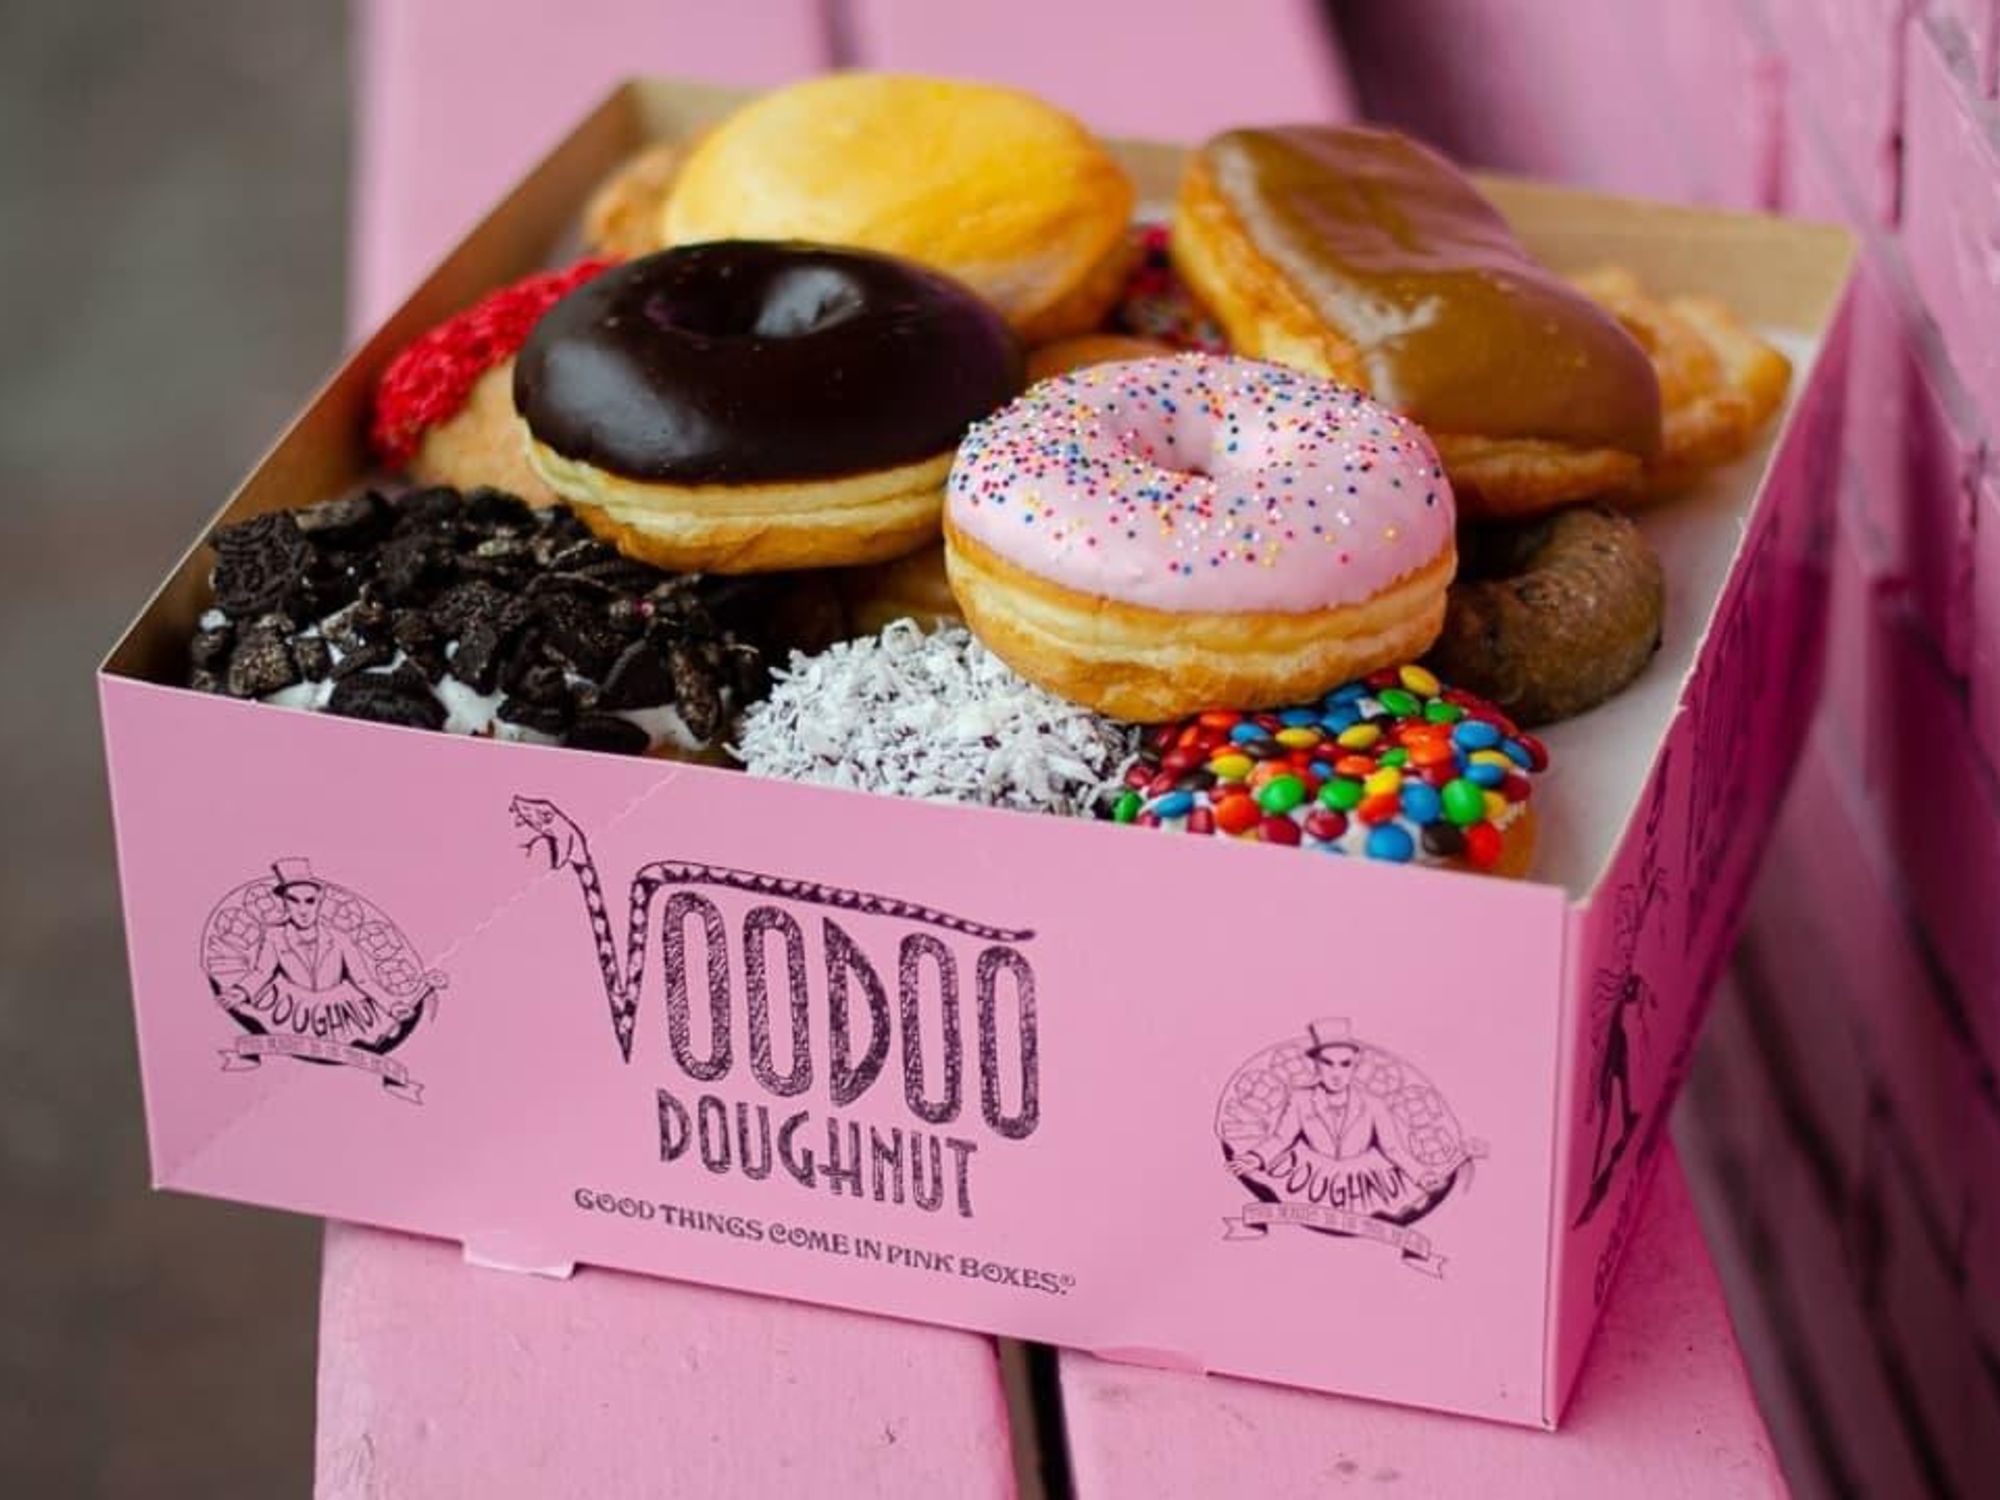 Edgy Portland doughnut chain opens fourth Houston-area location in Katy with drive-thru, murals, and wicked treats